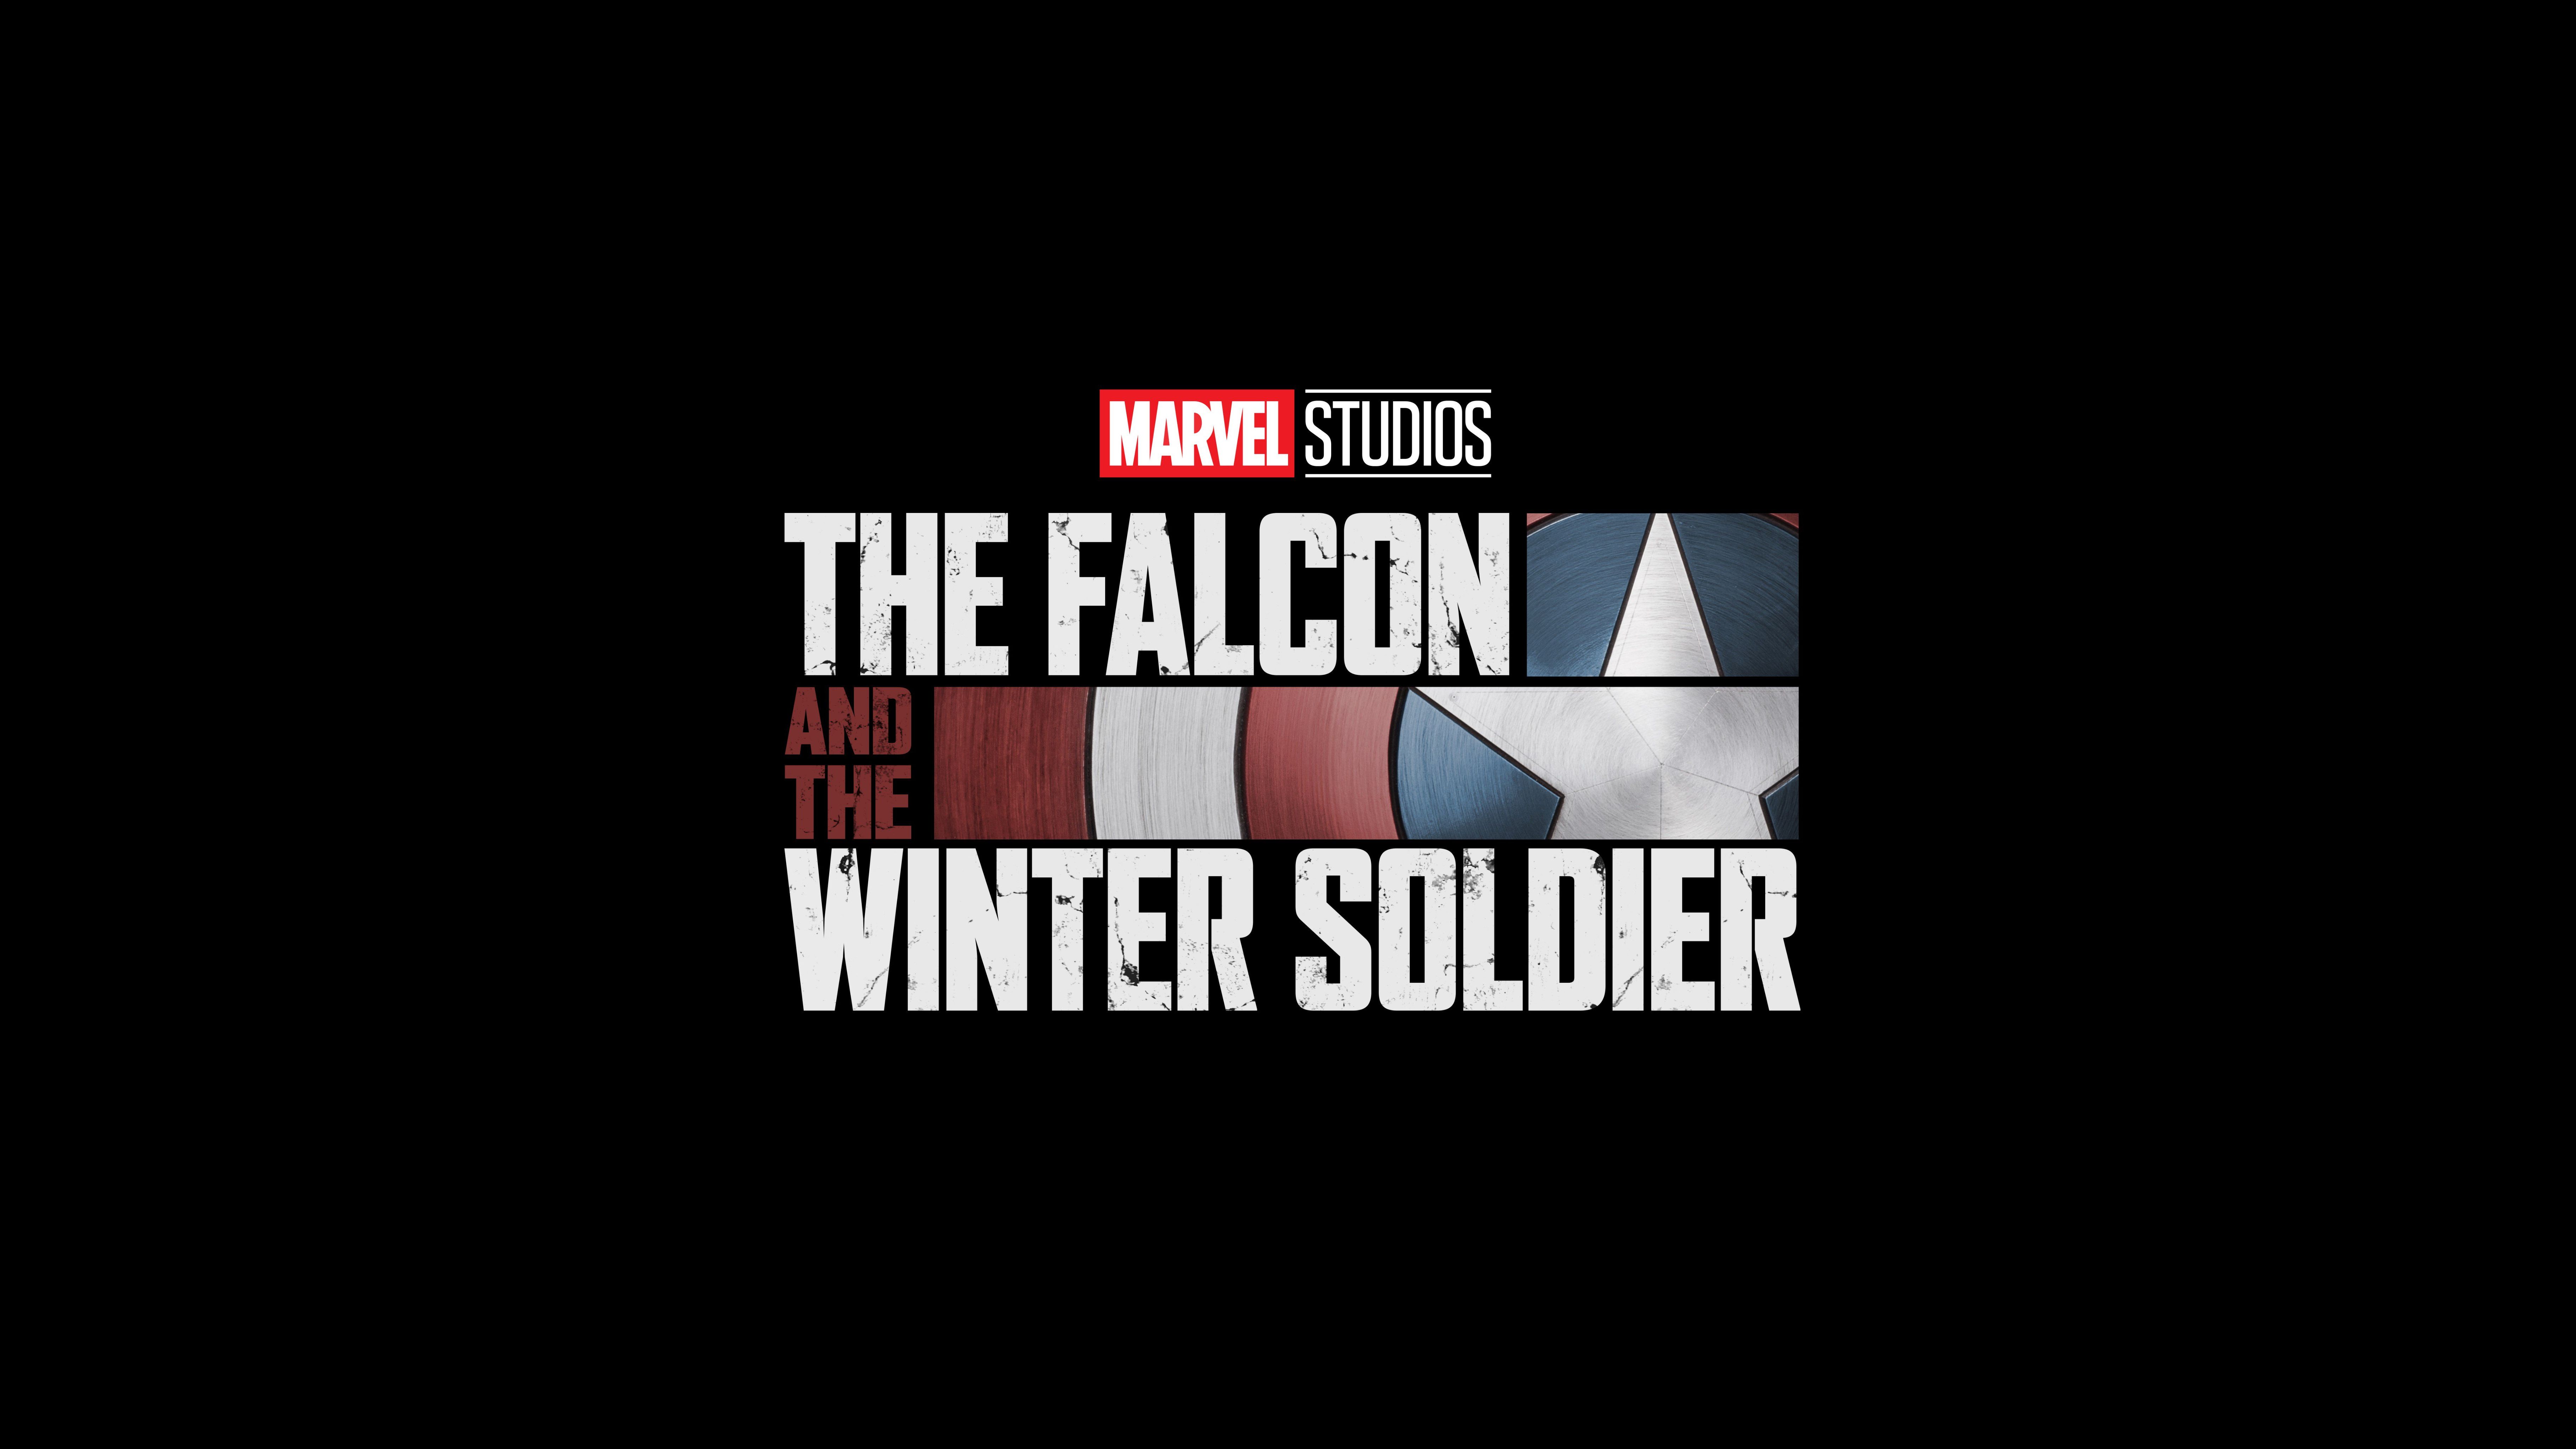 The Falcon And The Winter Soldier cellphone Wallpaper